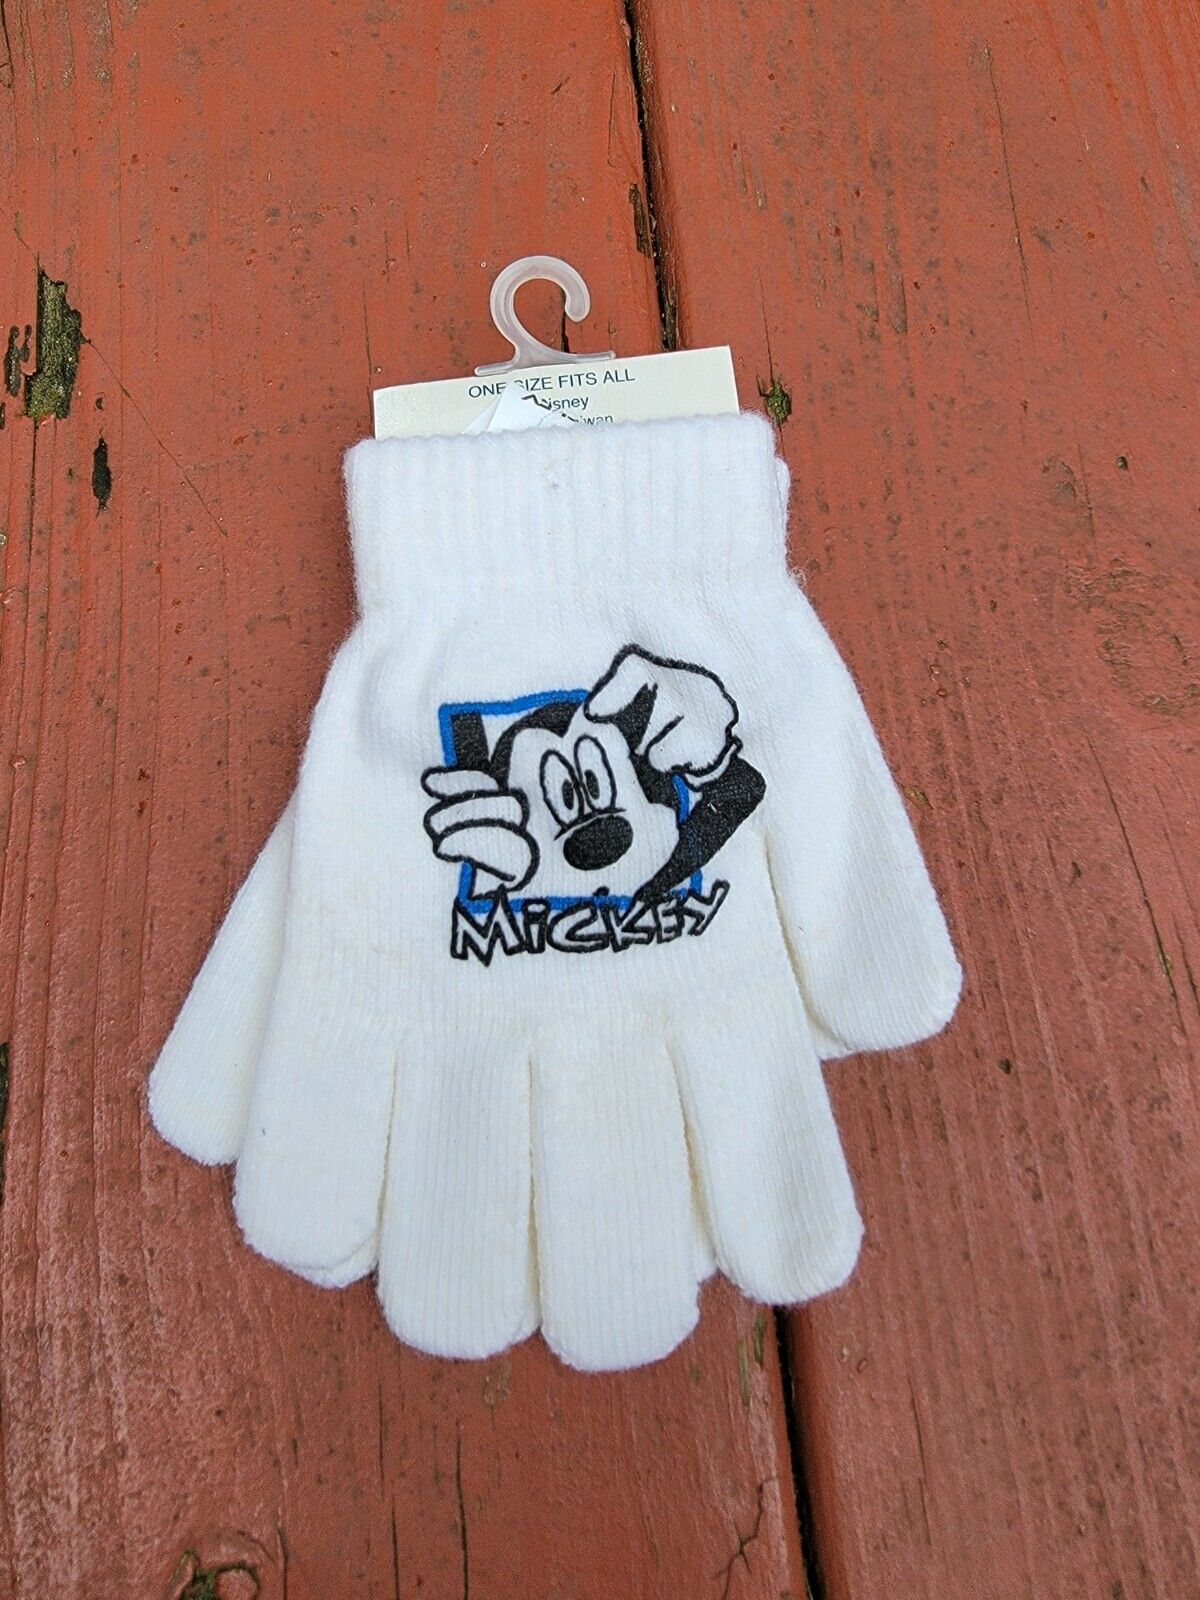 New Vintage DISNEY MICKEY MOUSE MAGIC GLOVES  MITTENS White